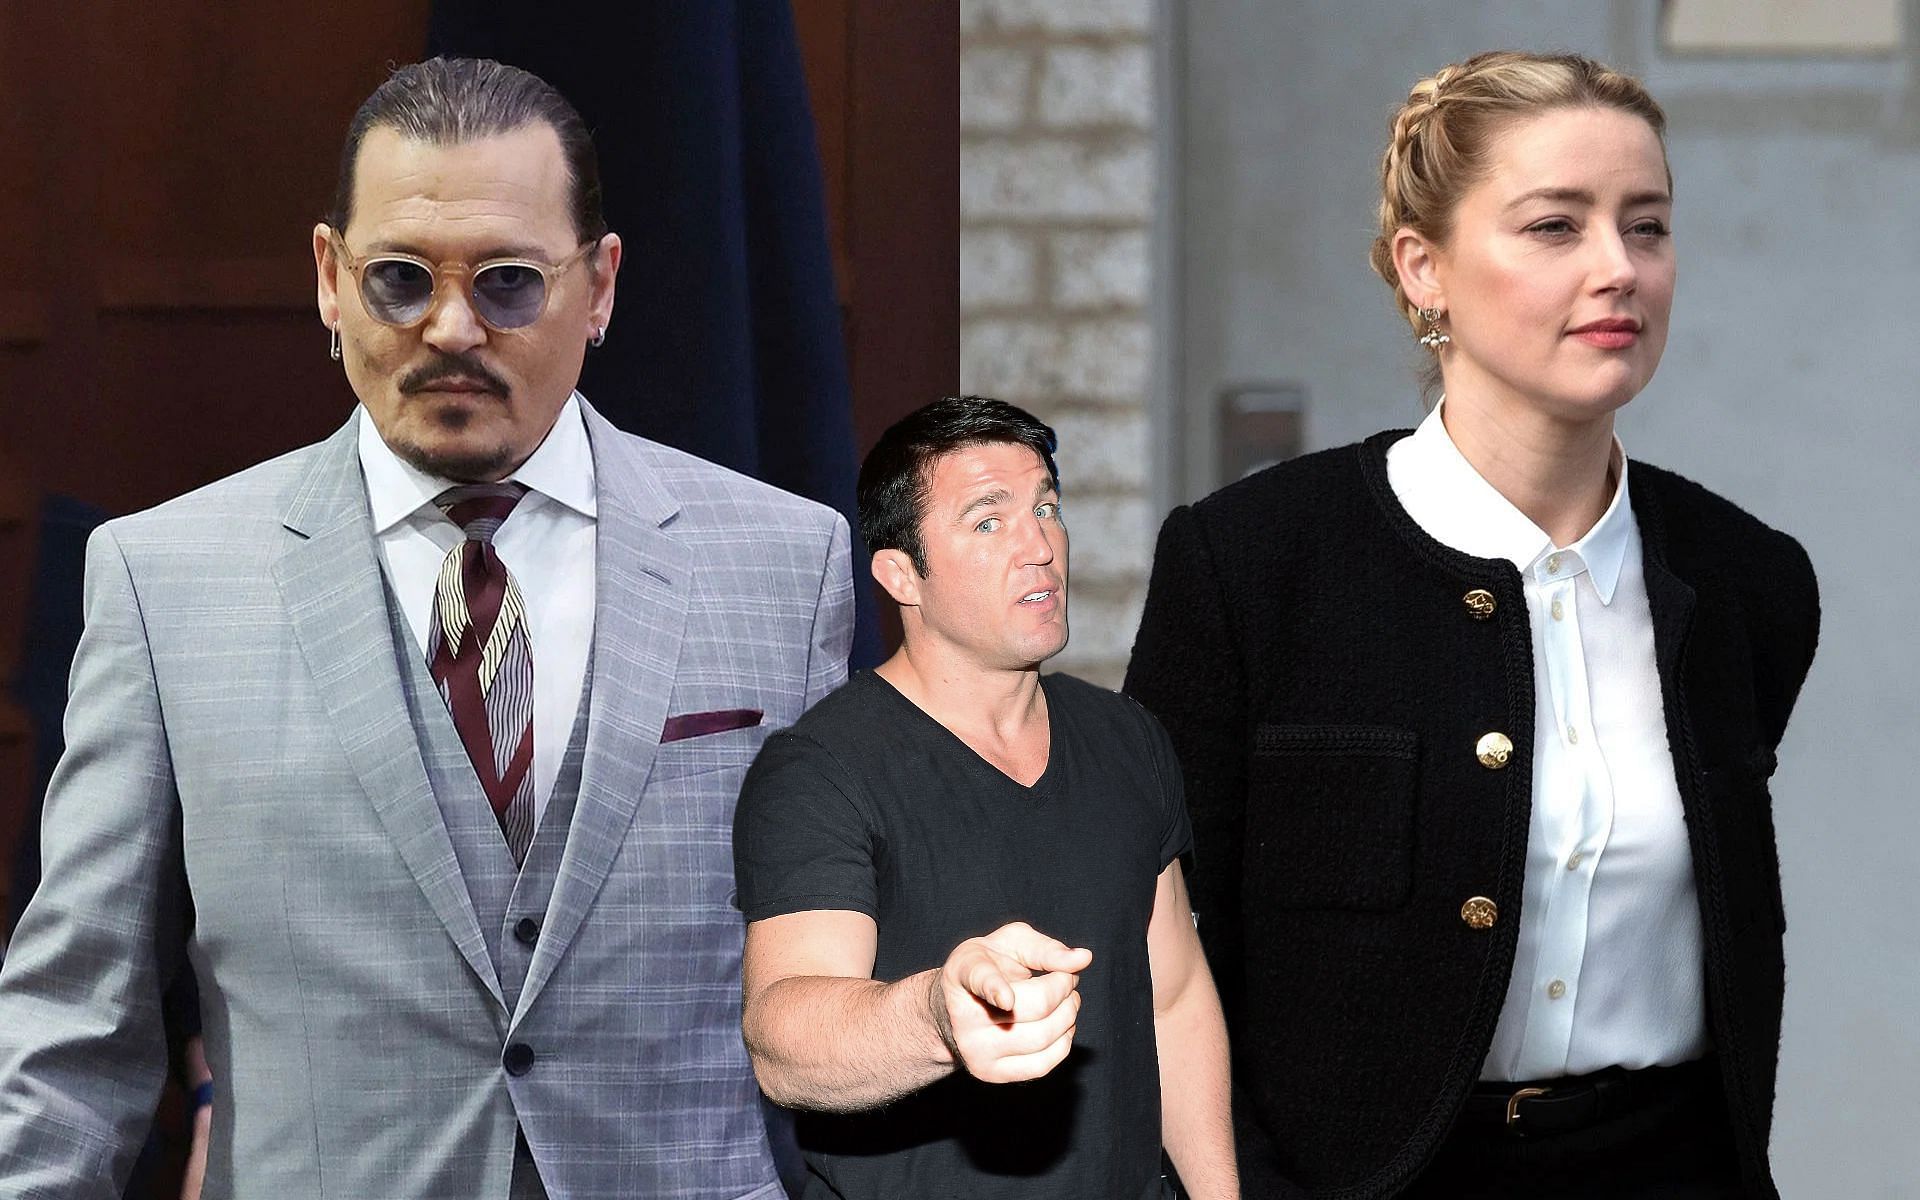 Johnny Depp (left), Chael Sonnen (center), and Amber Heard (right) (Images via Getty)